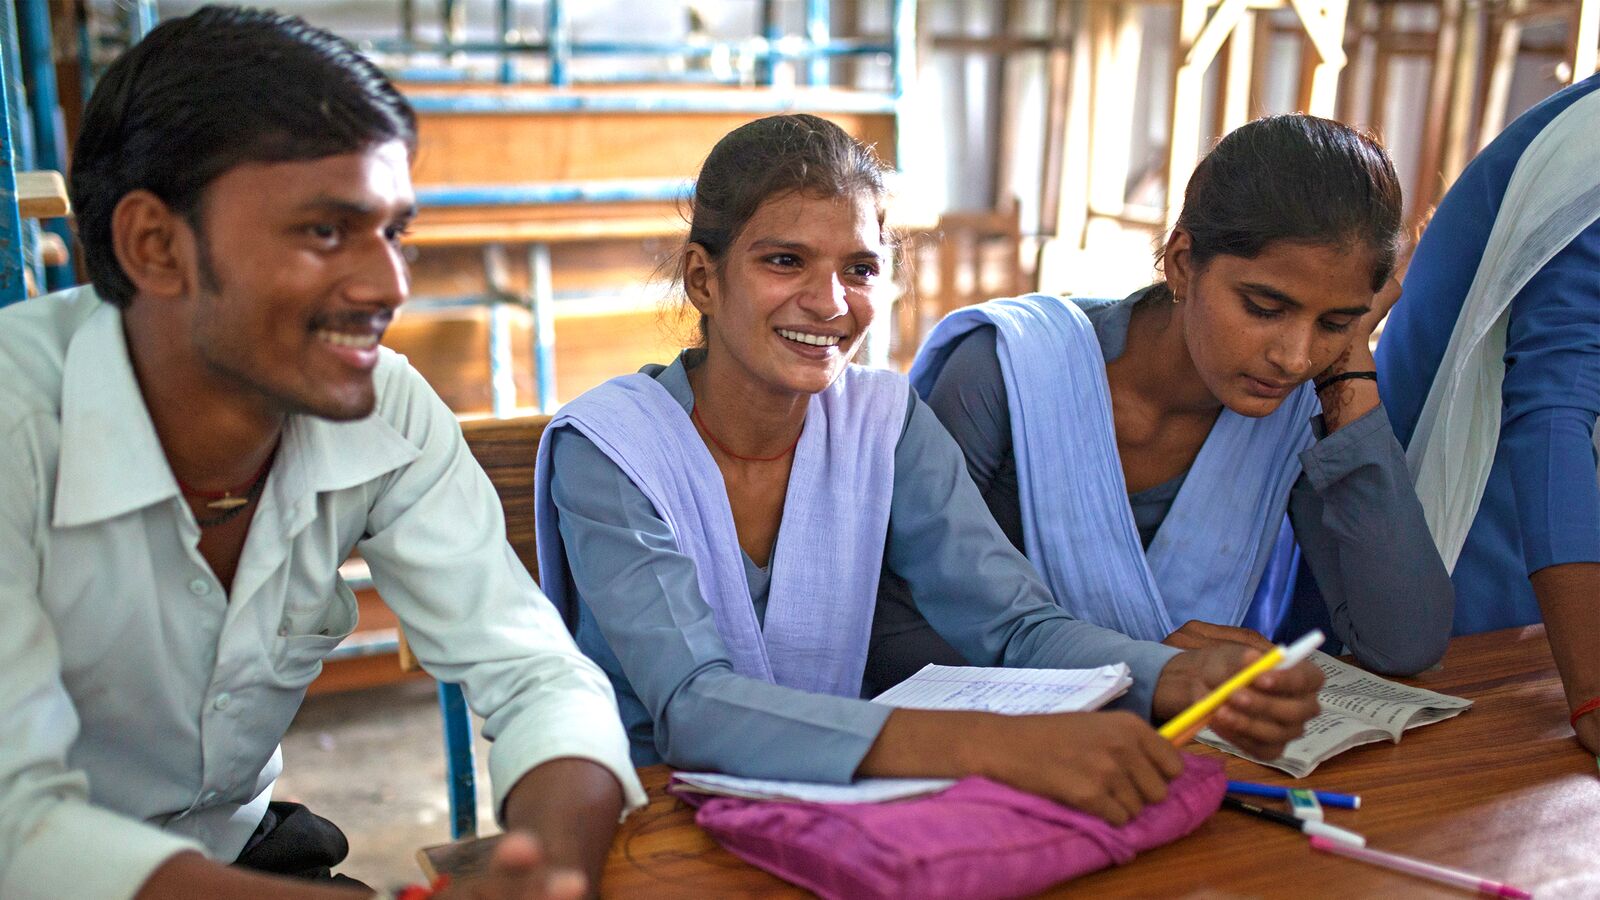 Three students in India sit together at a des